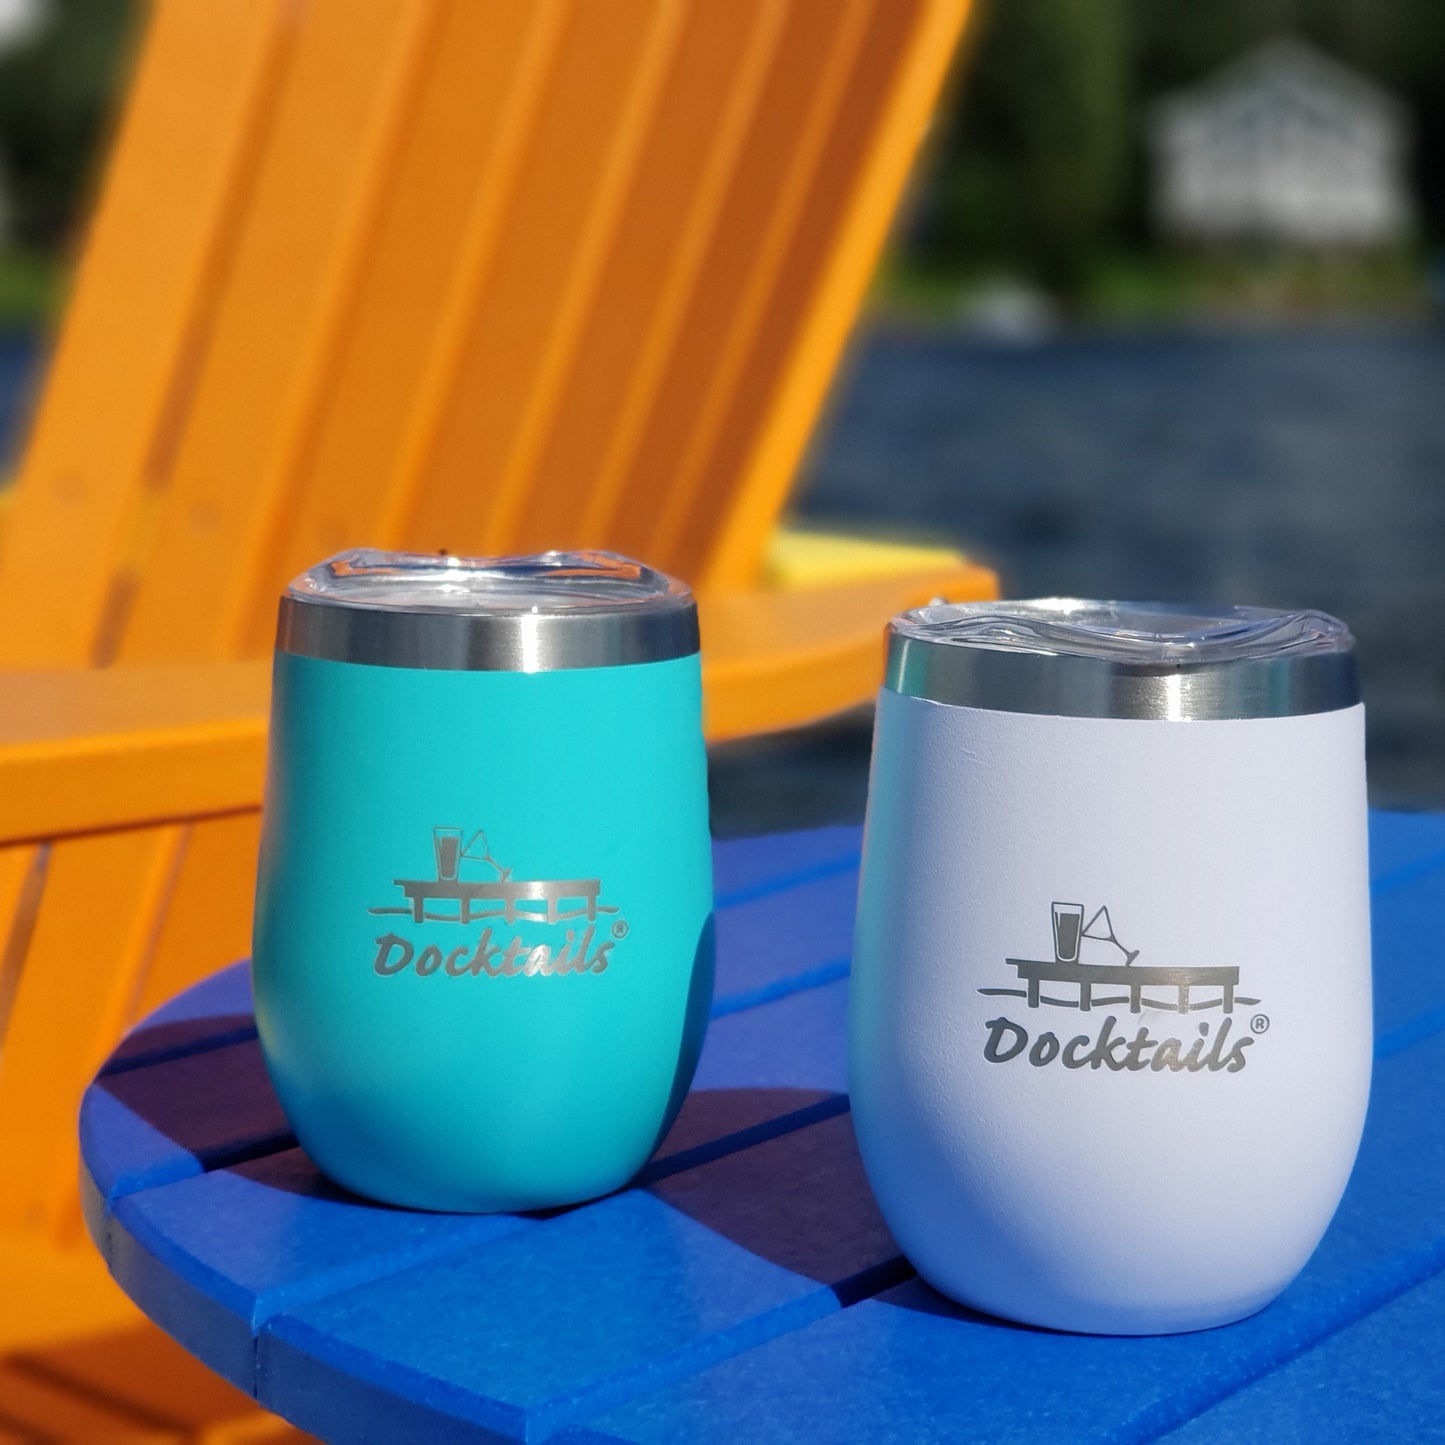 Docktails wine cups in use; docktails lifestyle